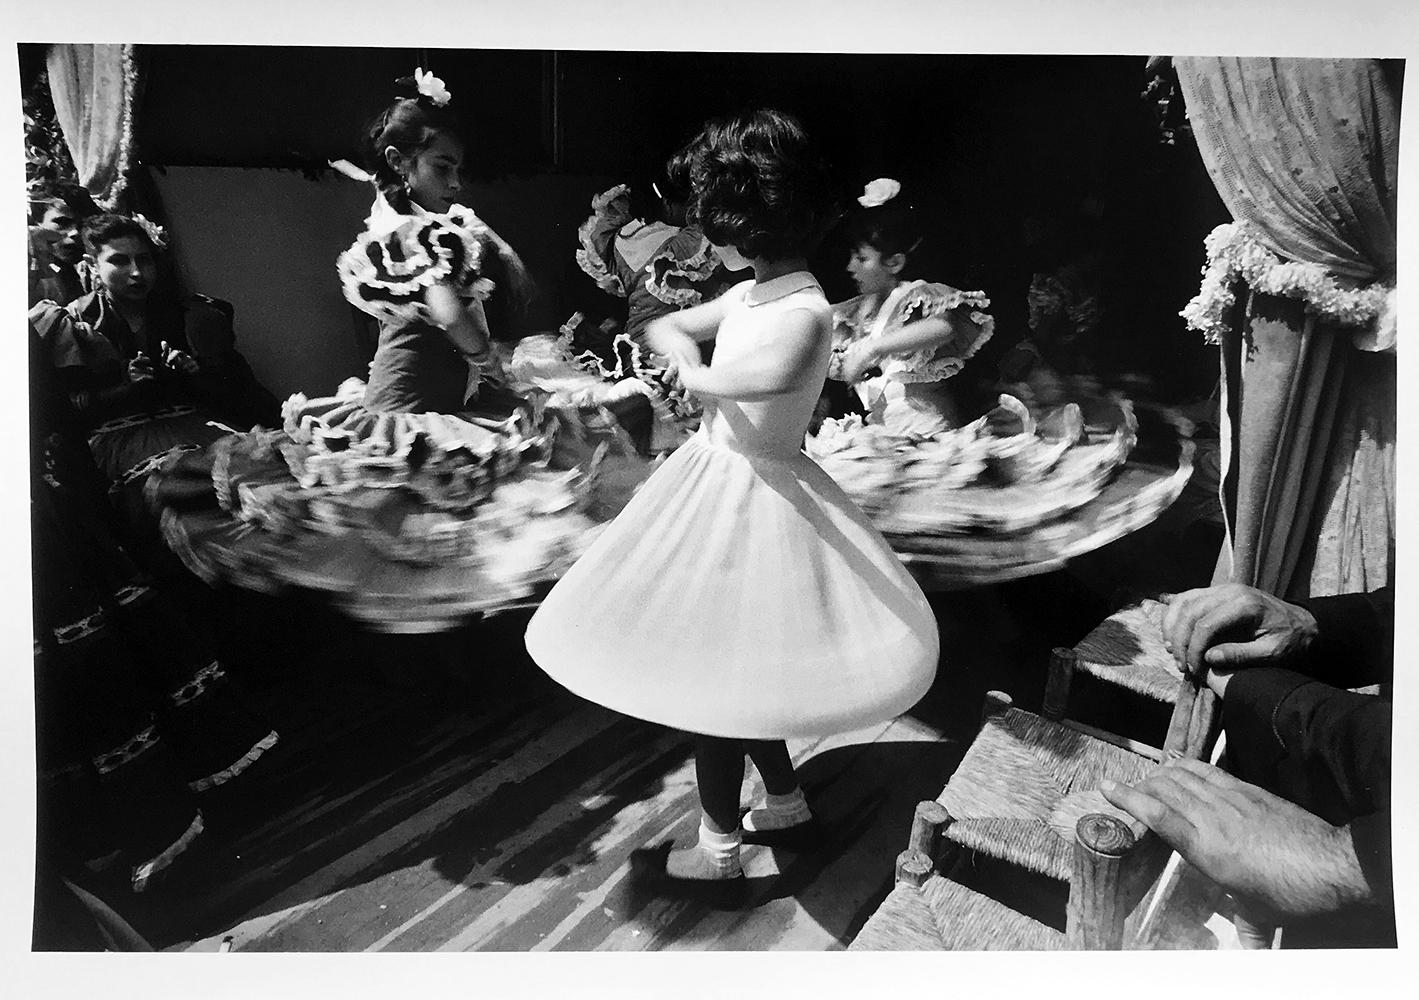 Shot in Seville, Spain, Haas captures a young girl mimicking the movements of flamenco dancers on the dance floor. Dancing Girls, 1956 by Ernst Haas, is an 11” x 14” gelatin silver print. The photograph was printed in 1992 by Chuck Kelton and is